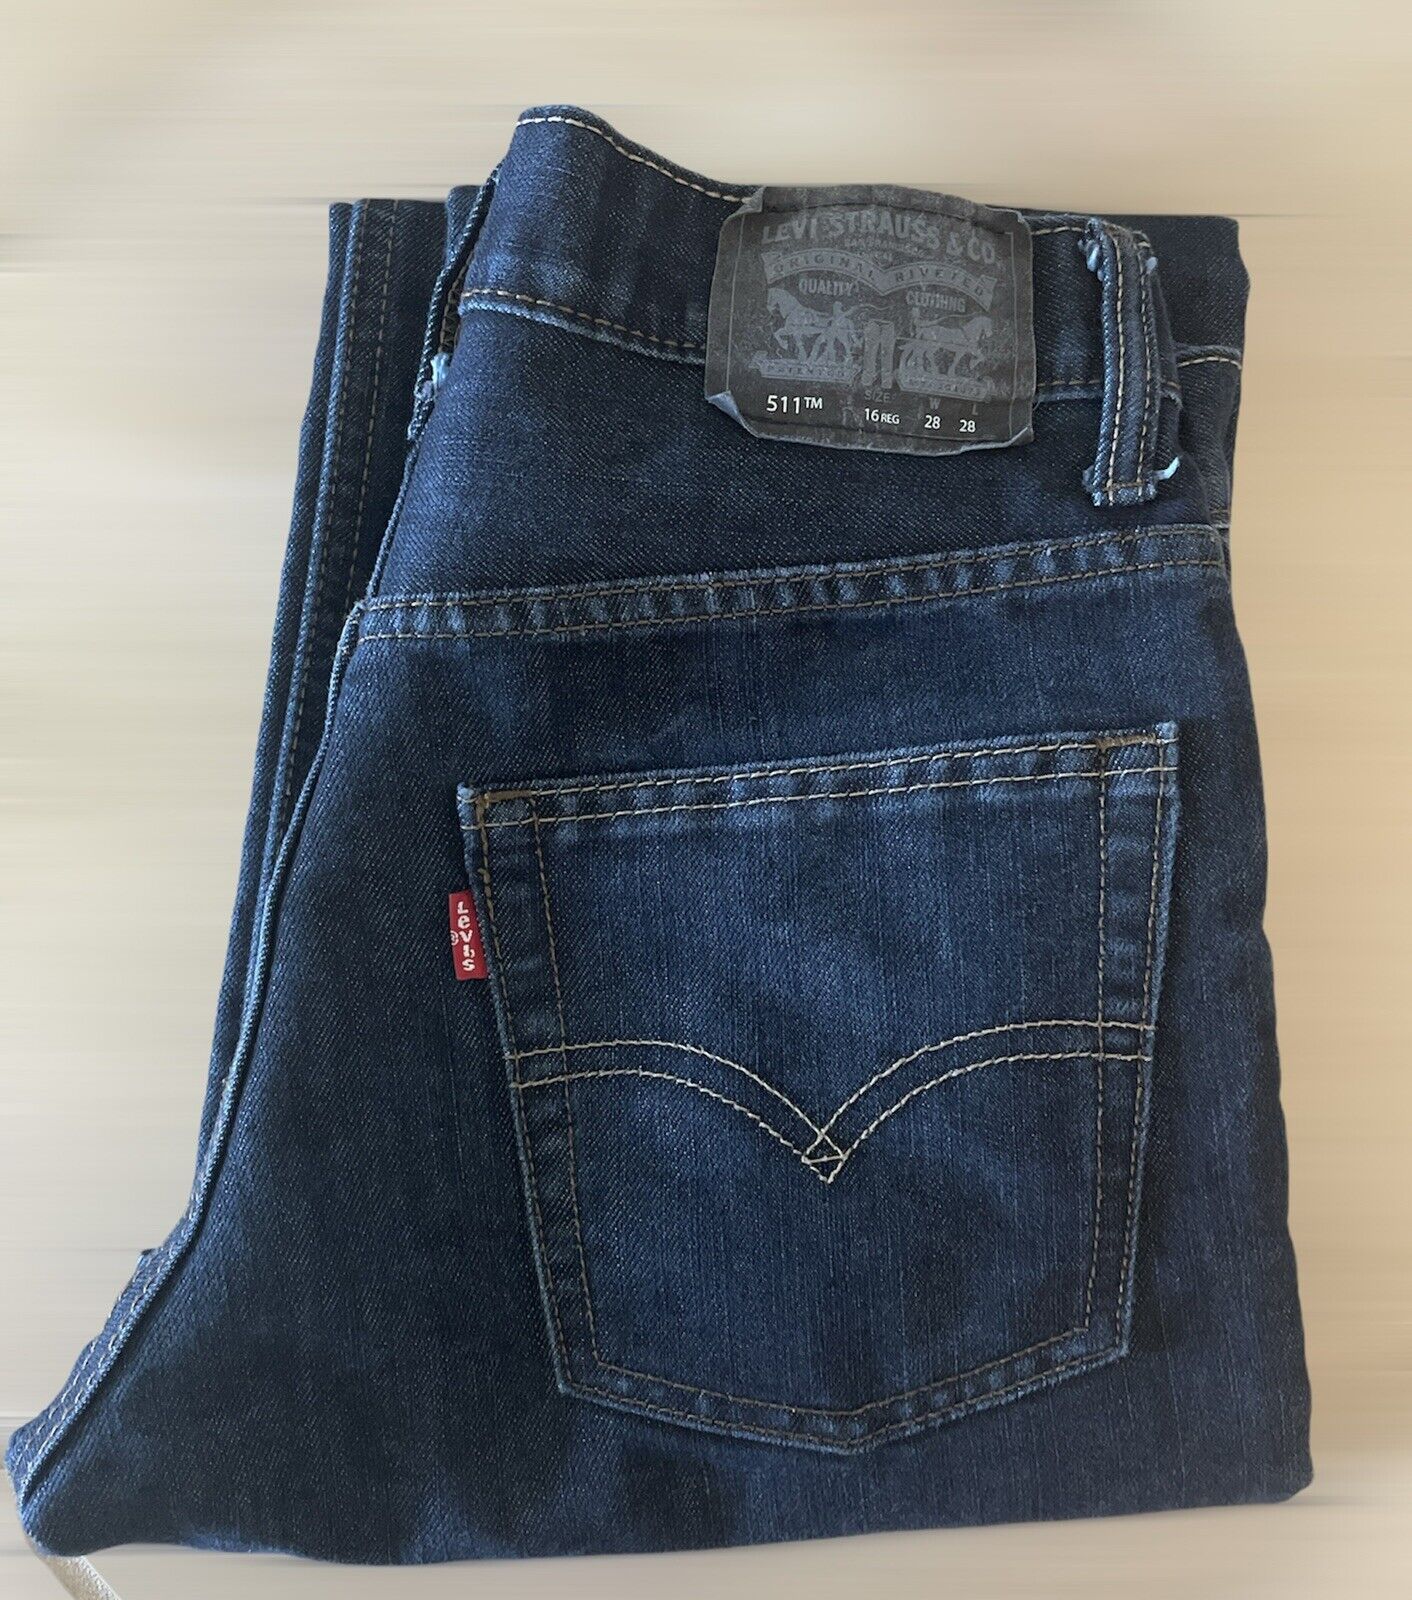 28x28 Boys We OFFer at cheap prices Levis 511 Slim Jeans Size x REG 16 28 free shipping